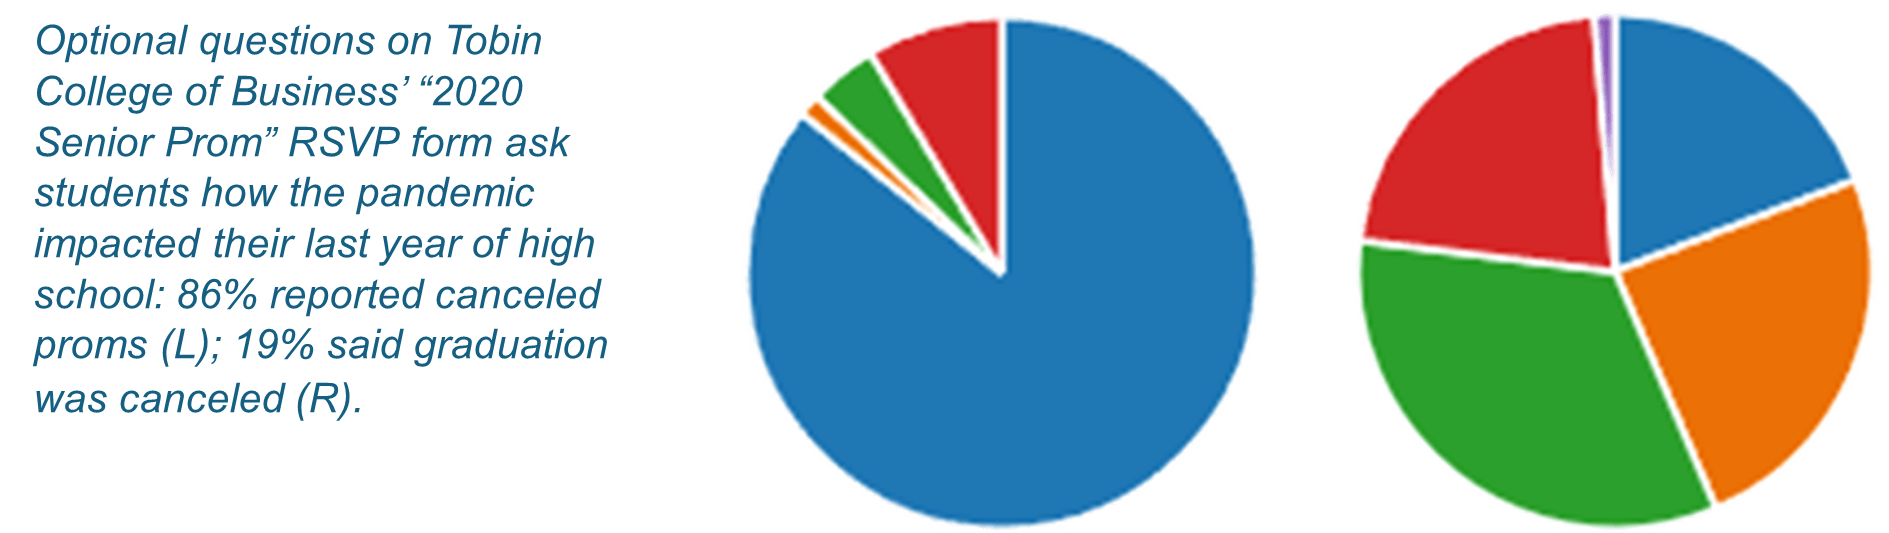 pie charts showing percentage of students who reported that their proms and graduations were canceled in 2020 by the pandemic